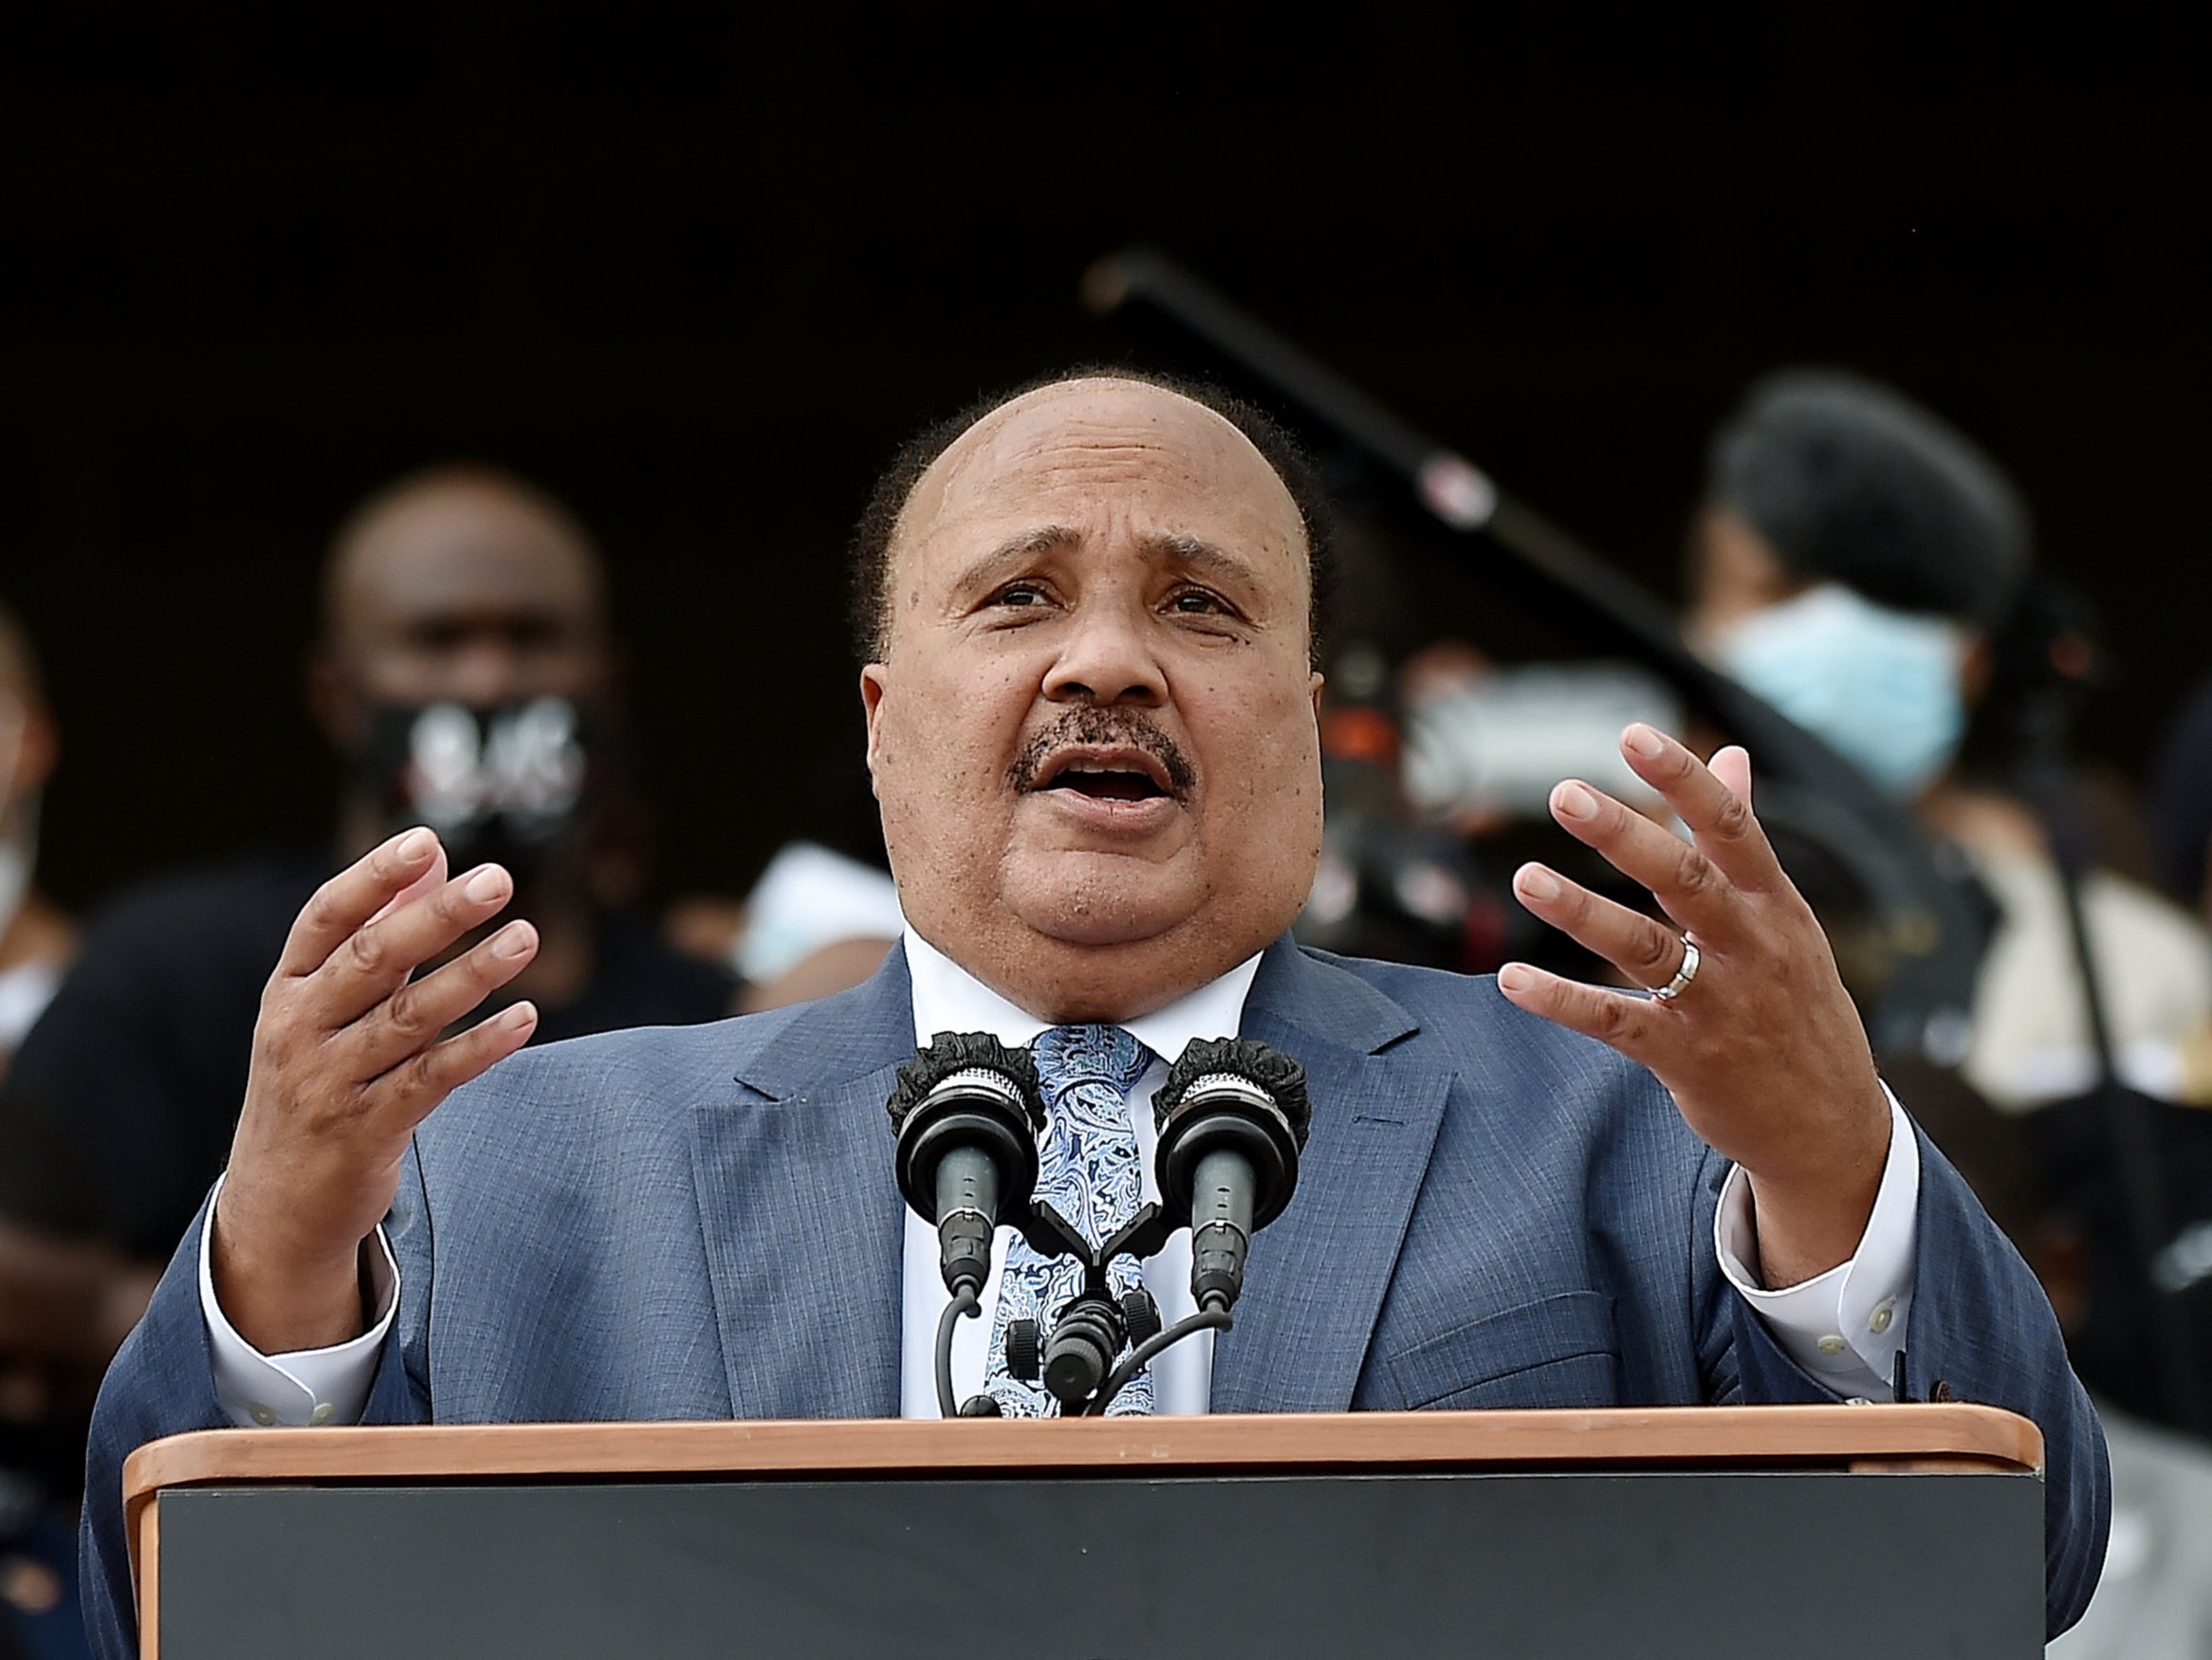 Martin Luther King III speaks during the March on Washington at the Lincoln Memorial on 28 August, 2020 in Washington, DC. Mr King is expected to lead a march this 28 August to protest voter suppression.